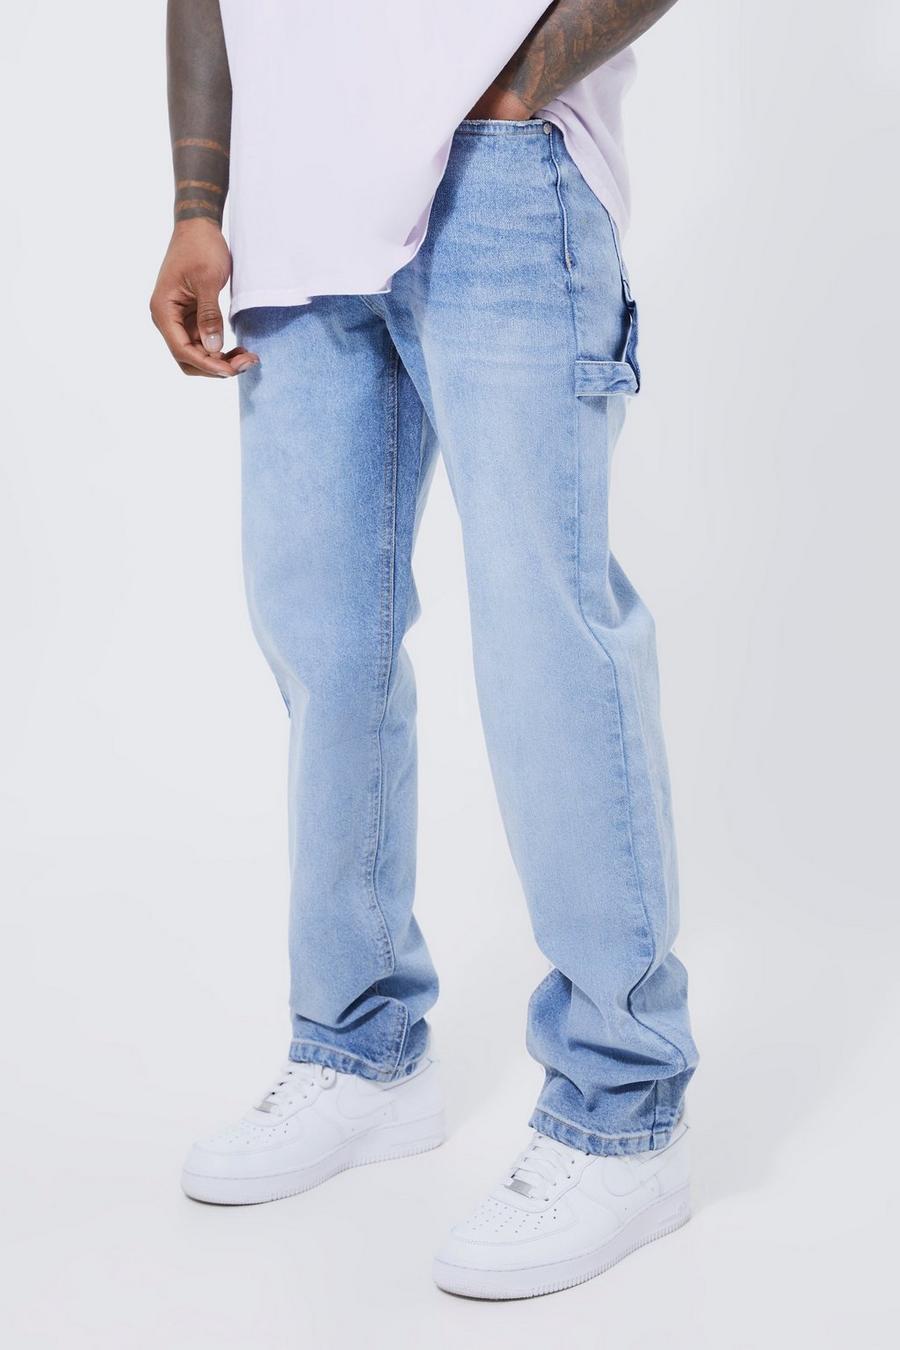 boohoo Mens Relaxed Fit Carpenter Jeans with Drop Crotch - Blue 34R